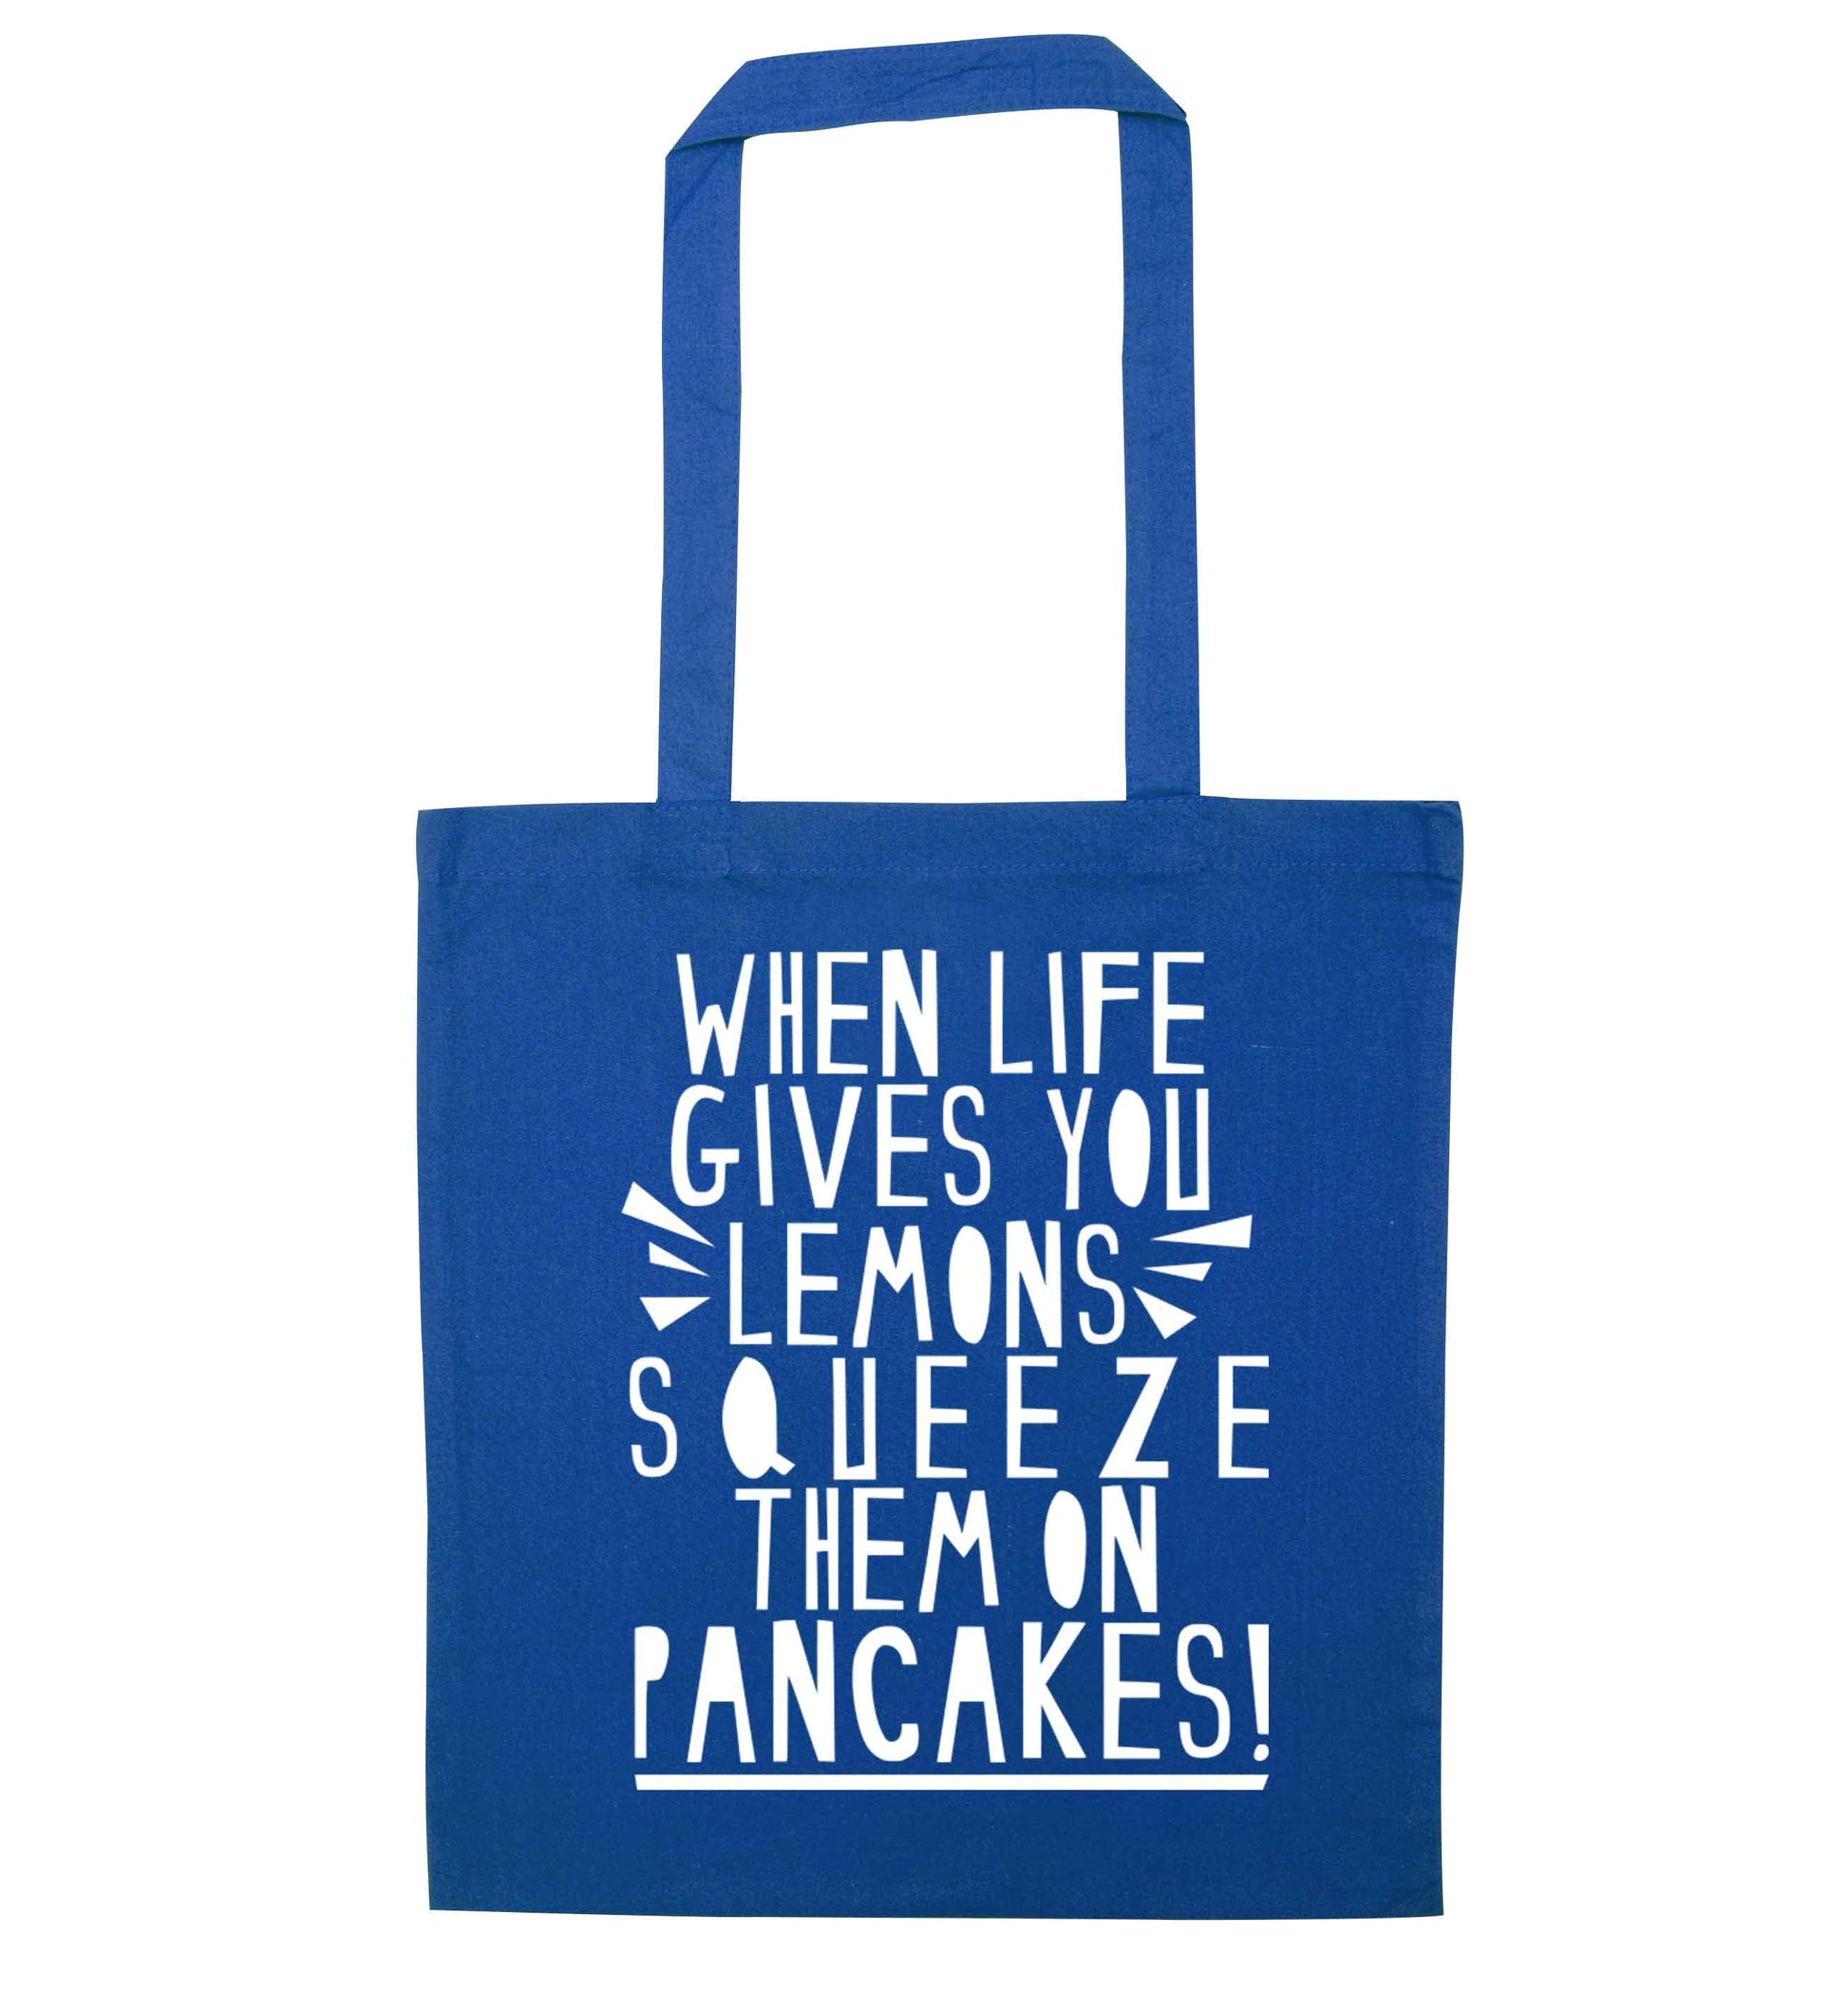 When life gives you lemons squeeze them on pancakes! blue tote bag